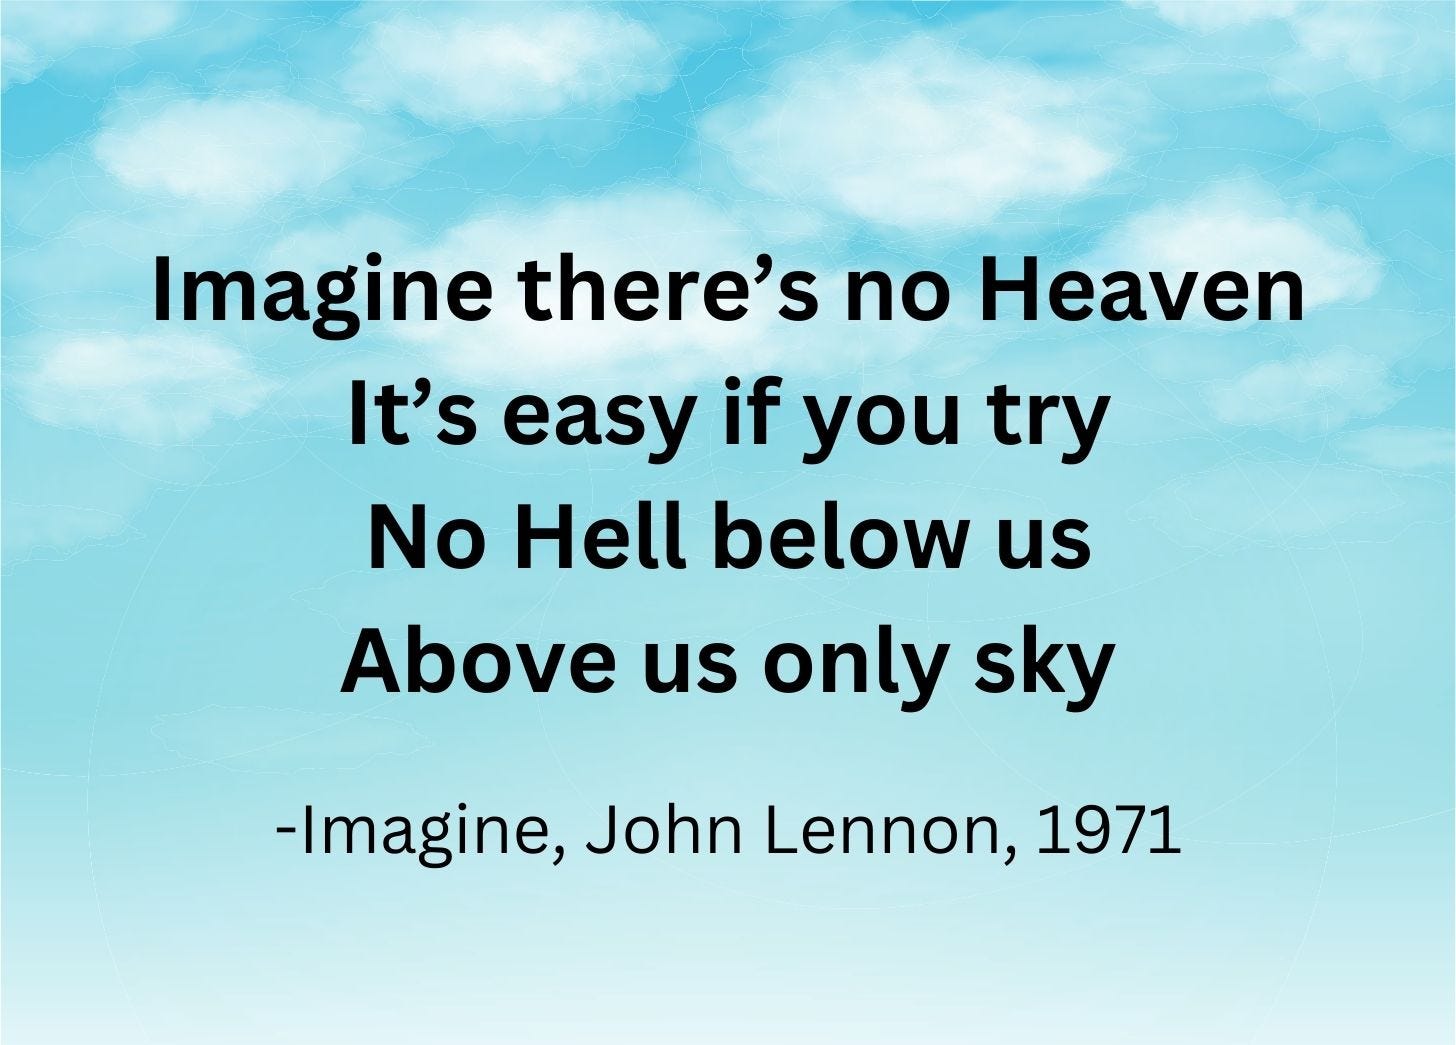 Blue sky with lyrics from Imagine: Imagine there's no Heave. It's easy if you try. No Hell below us, Above us only sky.